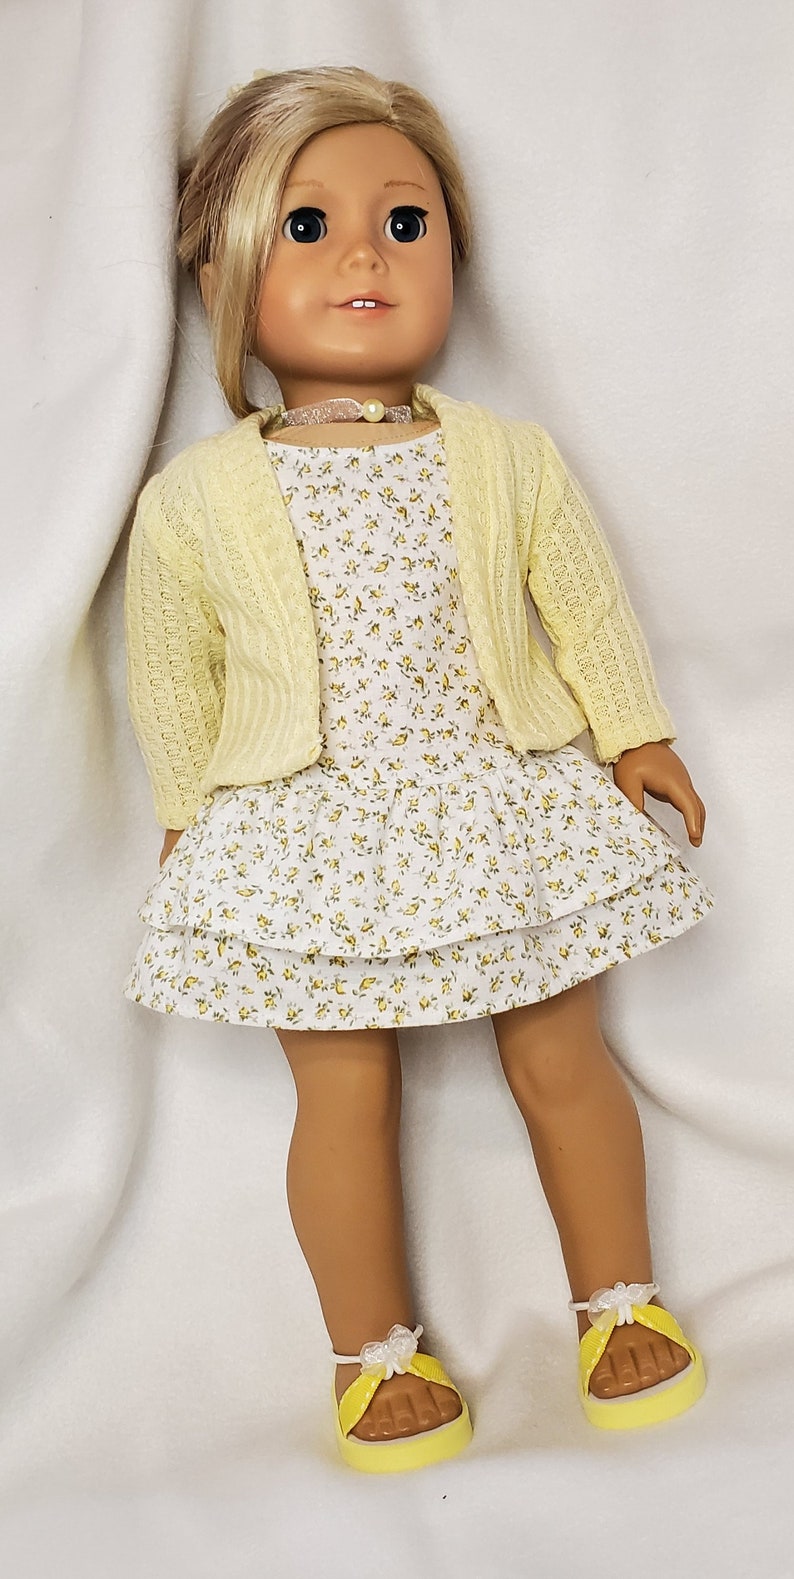 Handmade 18 Doll Clothes, Doll Clothes Fits Popular 18 inch Dolls Spring into Yellow Rosebuds outfit Dress, Cardigan, Sandals, Necklace image 2